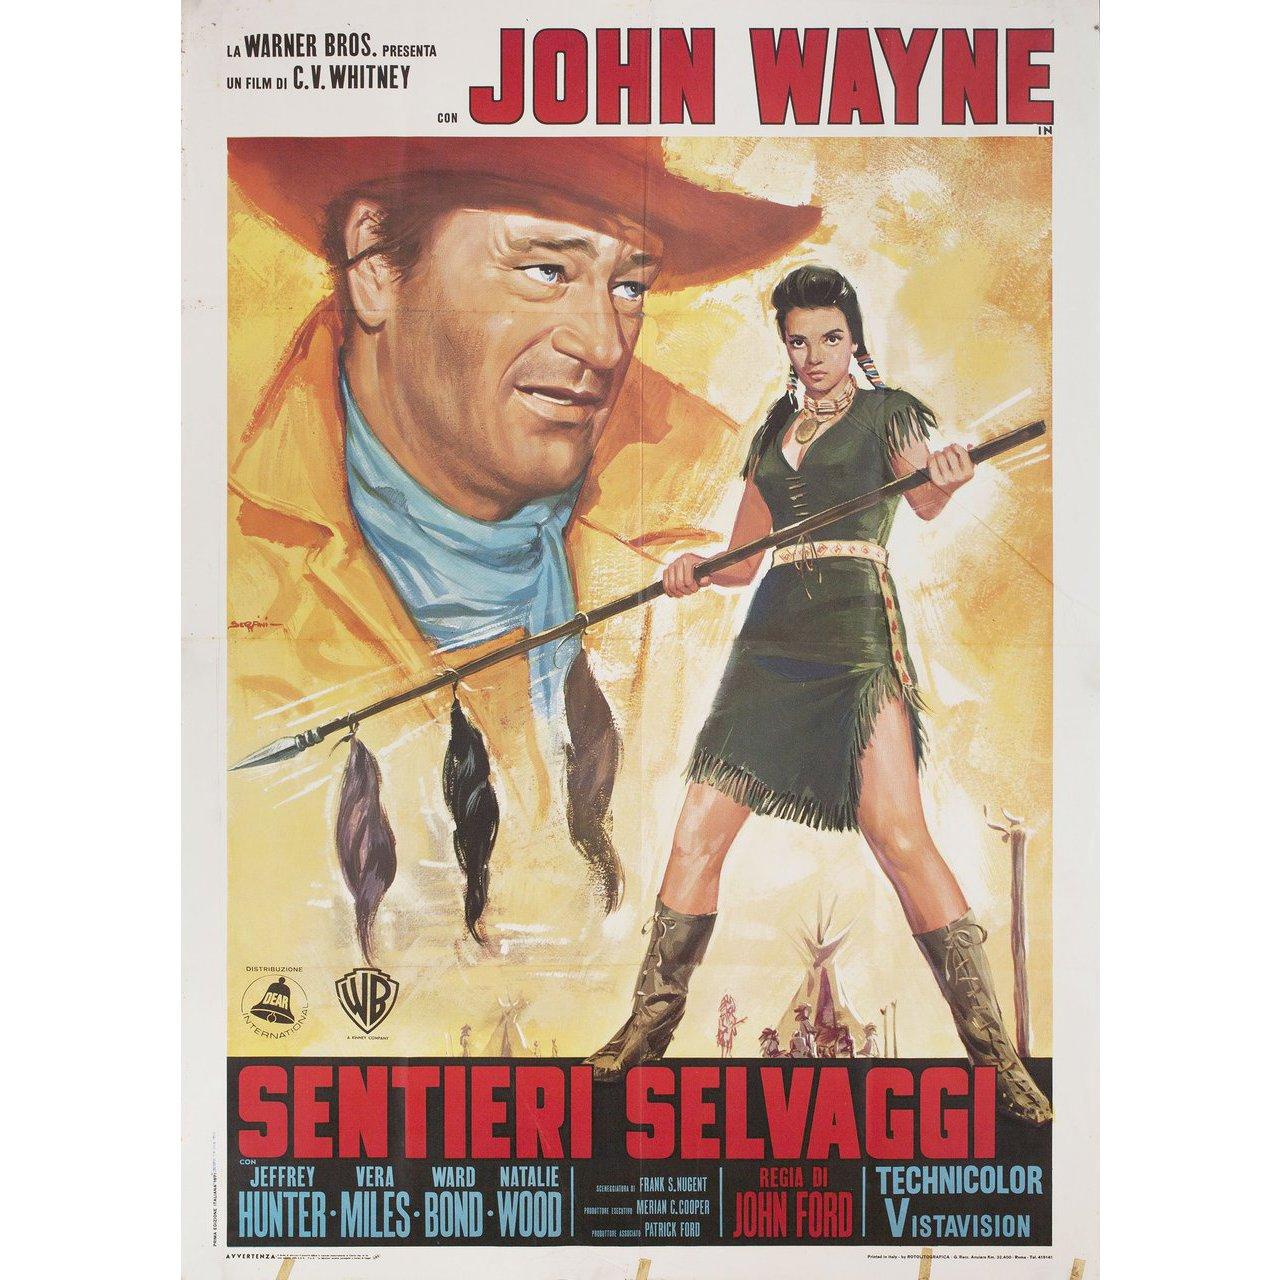 Original 1971 re-release Italian due fogli poster by Serfini for the 1956 film The Searchers directed by John Ford with John Wayne / Jeffrey Hunter / Vera Miles / Ward Bond. Very Good condition, folded with tape on the corners & some wrinkling. Many